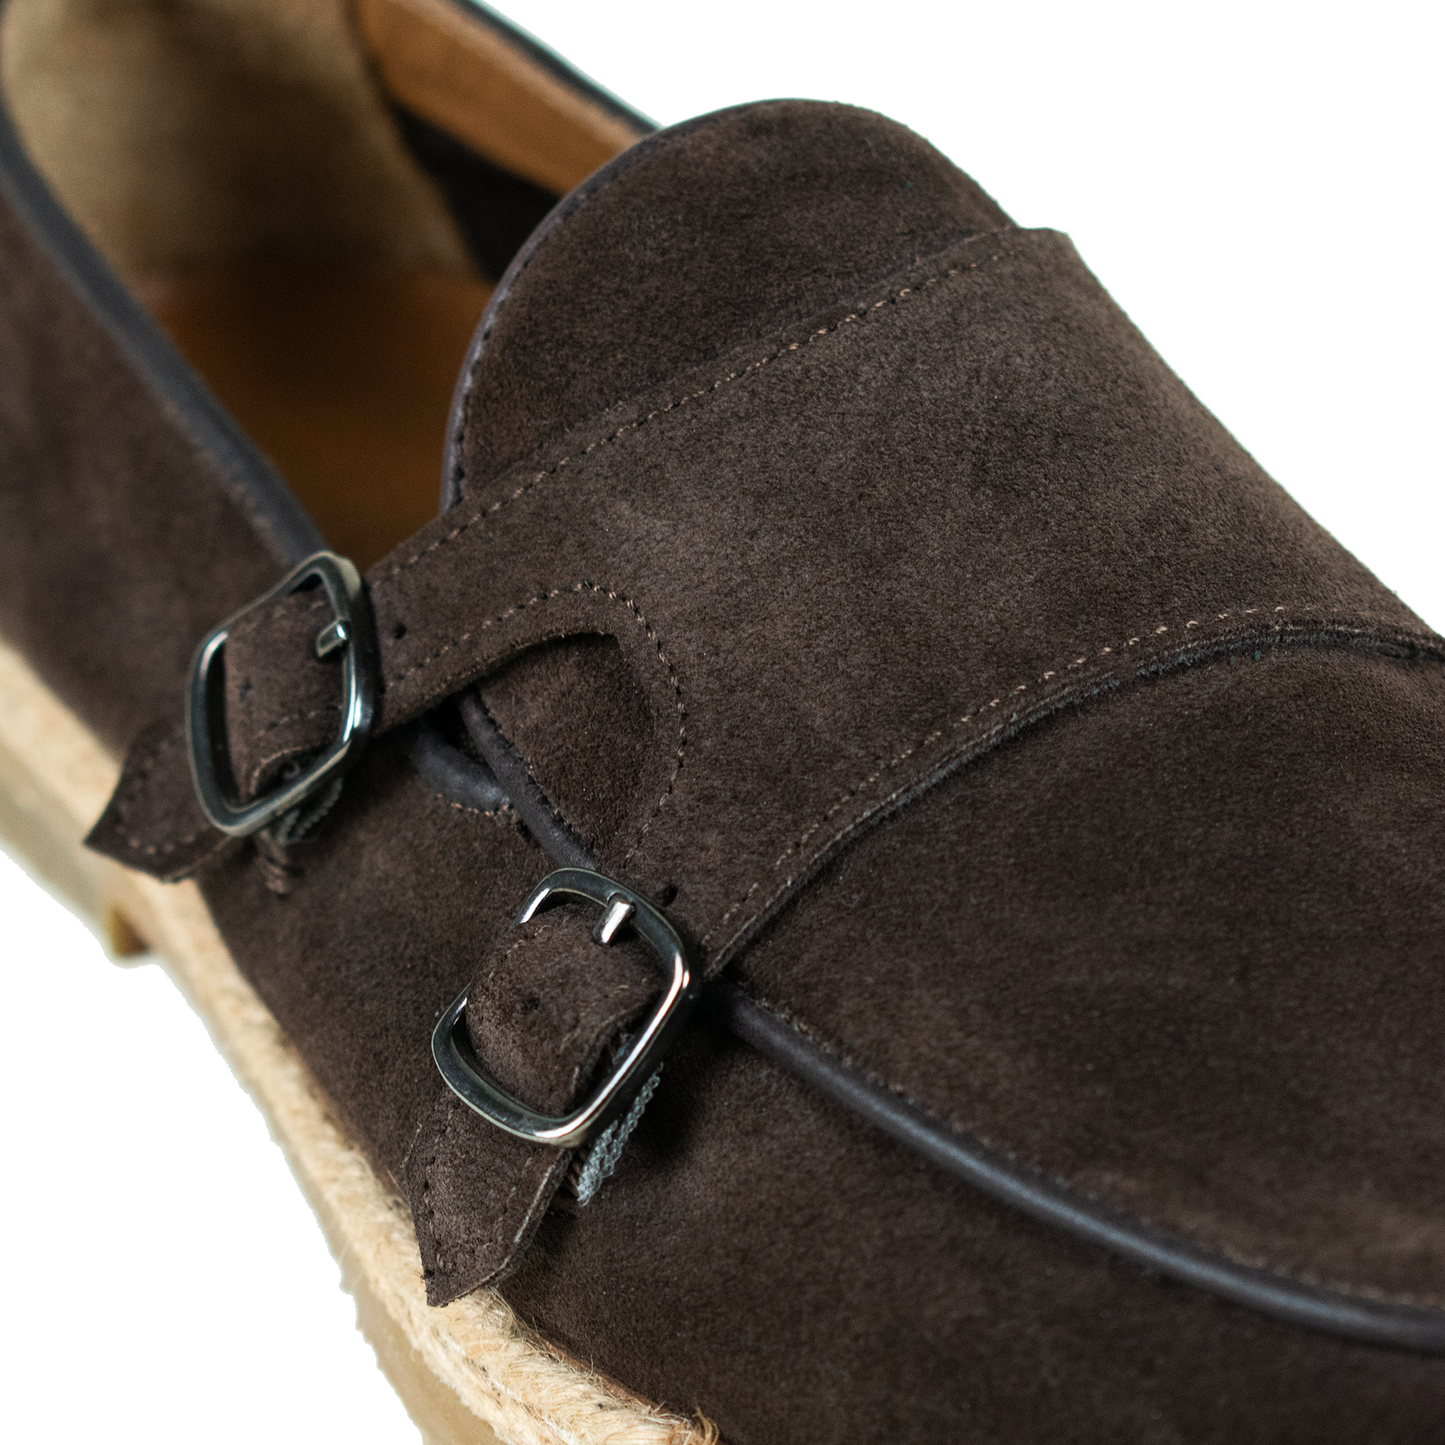 Brown suede loafer